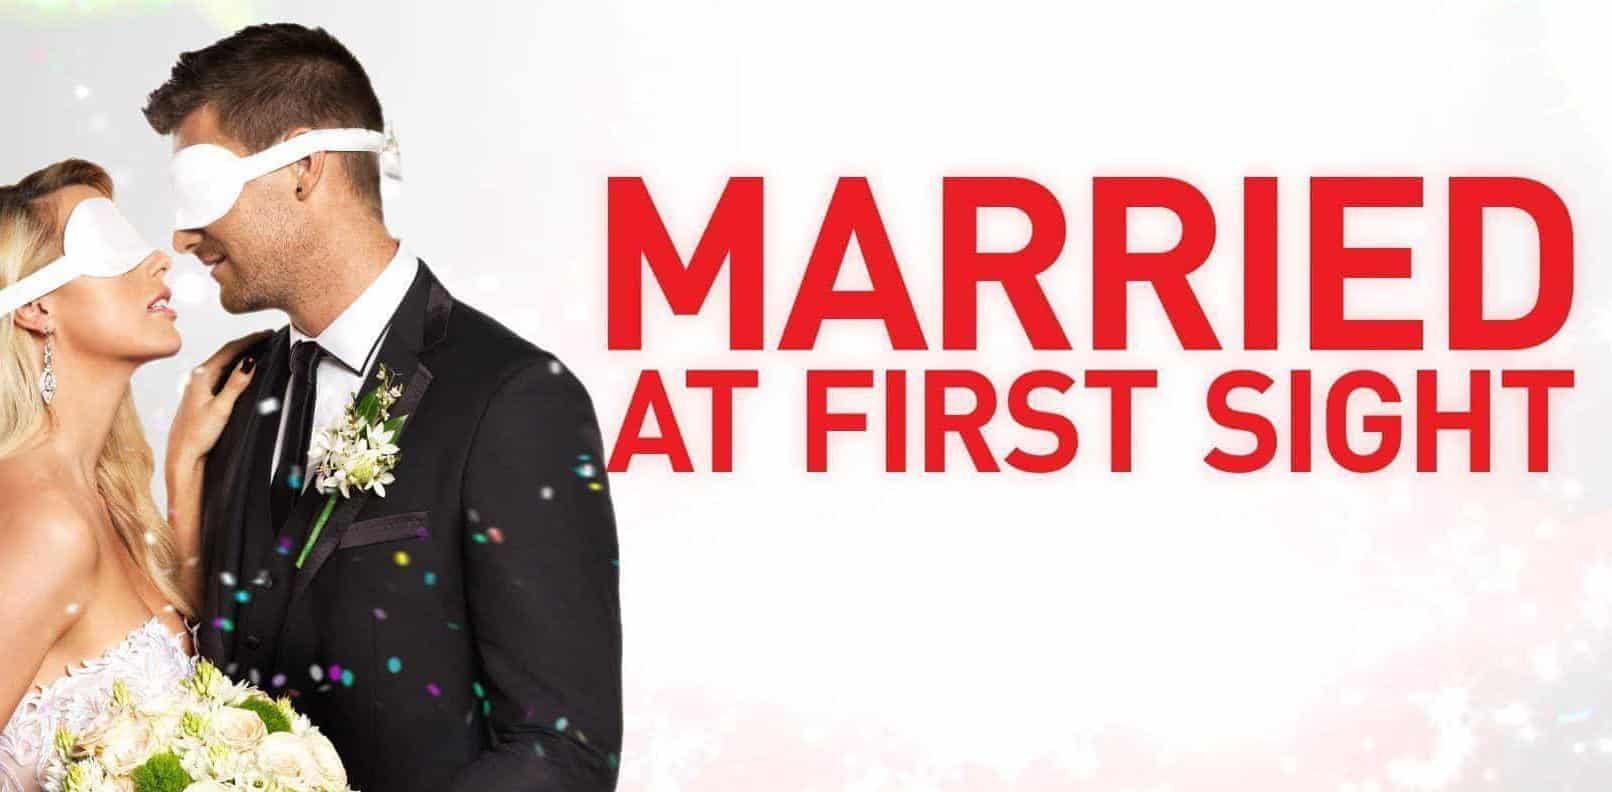 Married at First Sight (AU) Season 10 cast